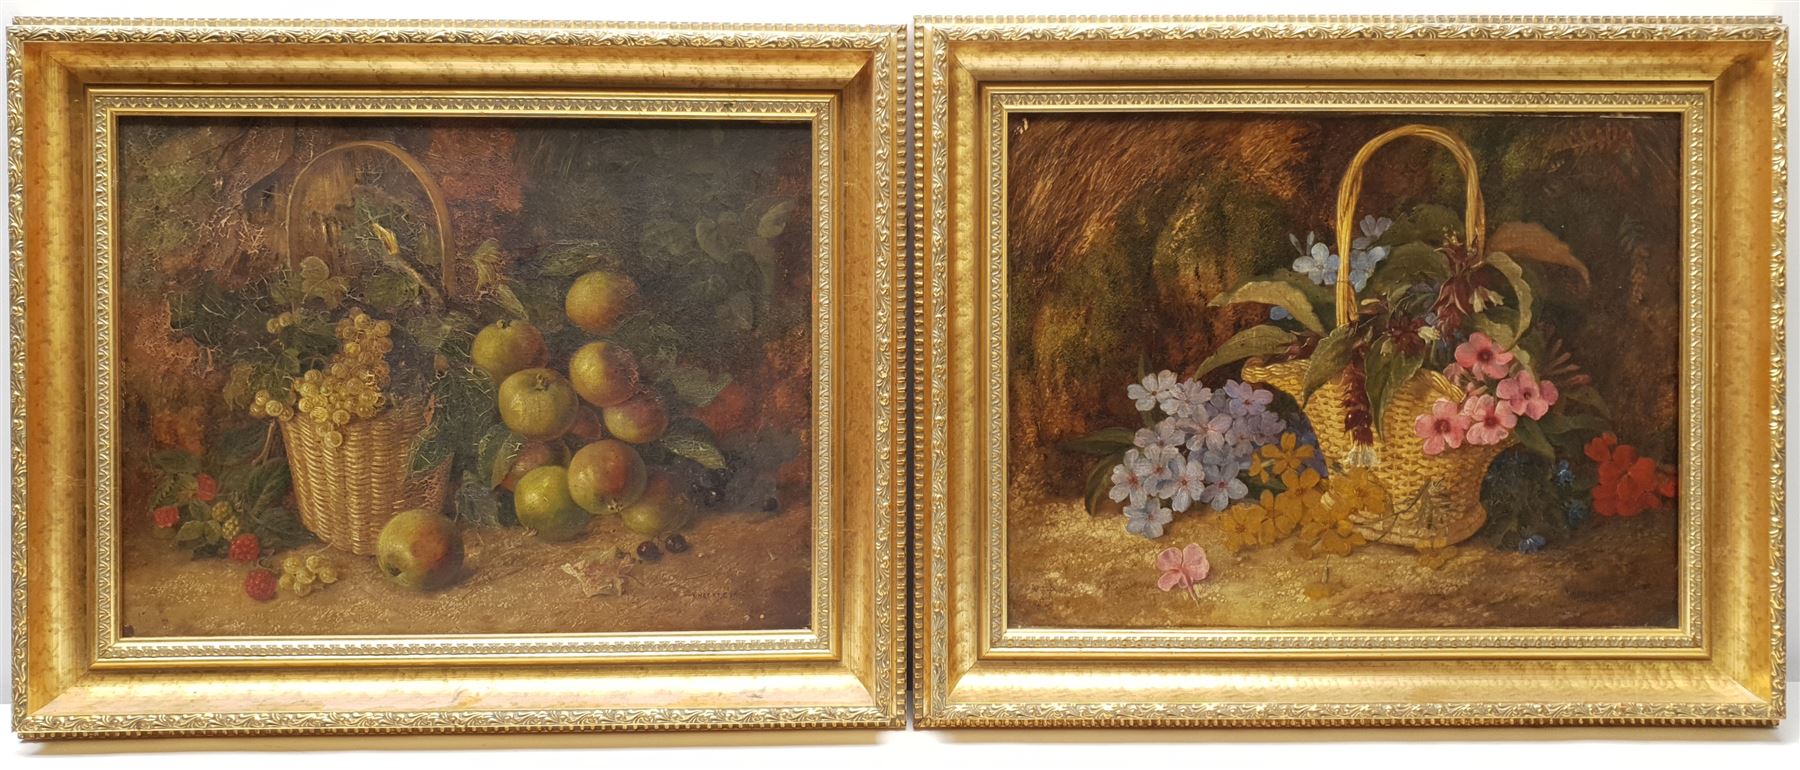 Attrib. Vincent Clare (British 1855-1930): Fruit and Flowers in Wicker Baskets, pair oils on canvas